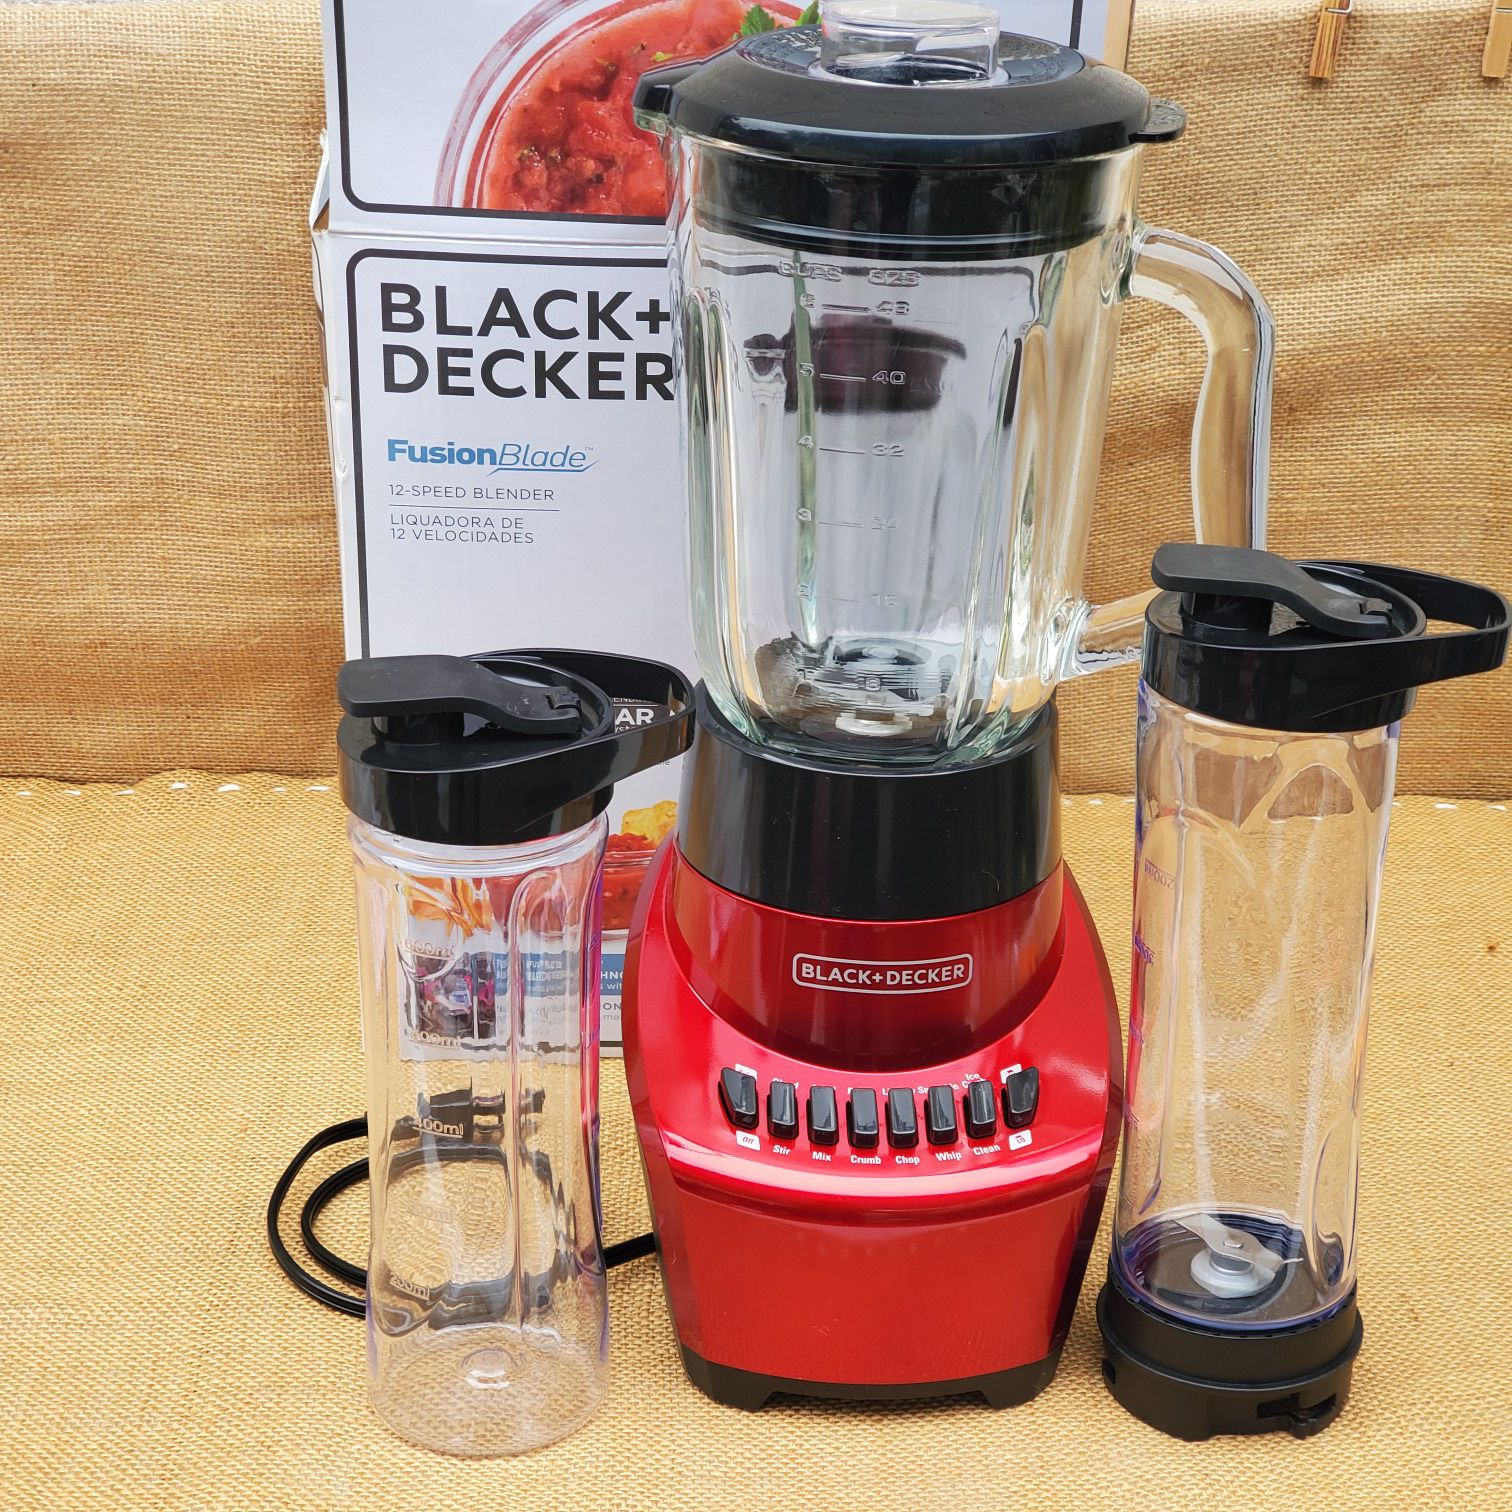 NEW BLACK + DECKER 12 speed Blender with Glass Jar and 2 ( 20oz plastic to-go cups )